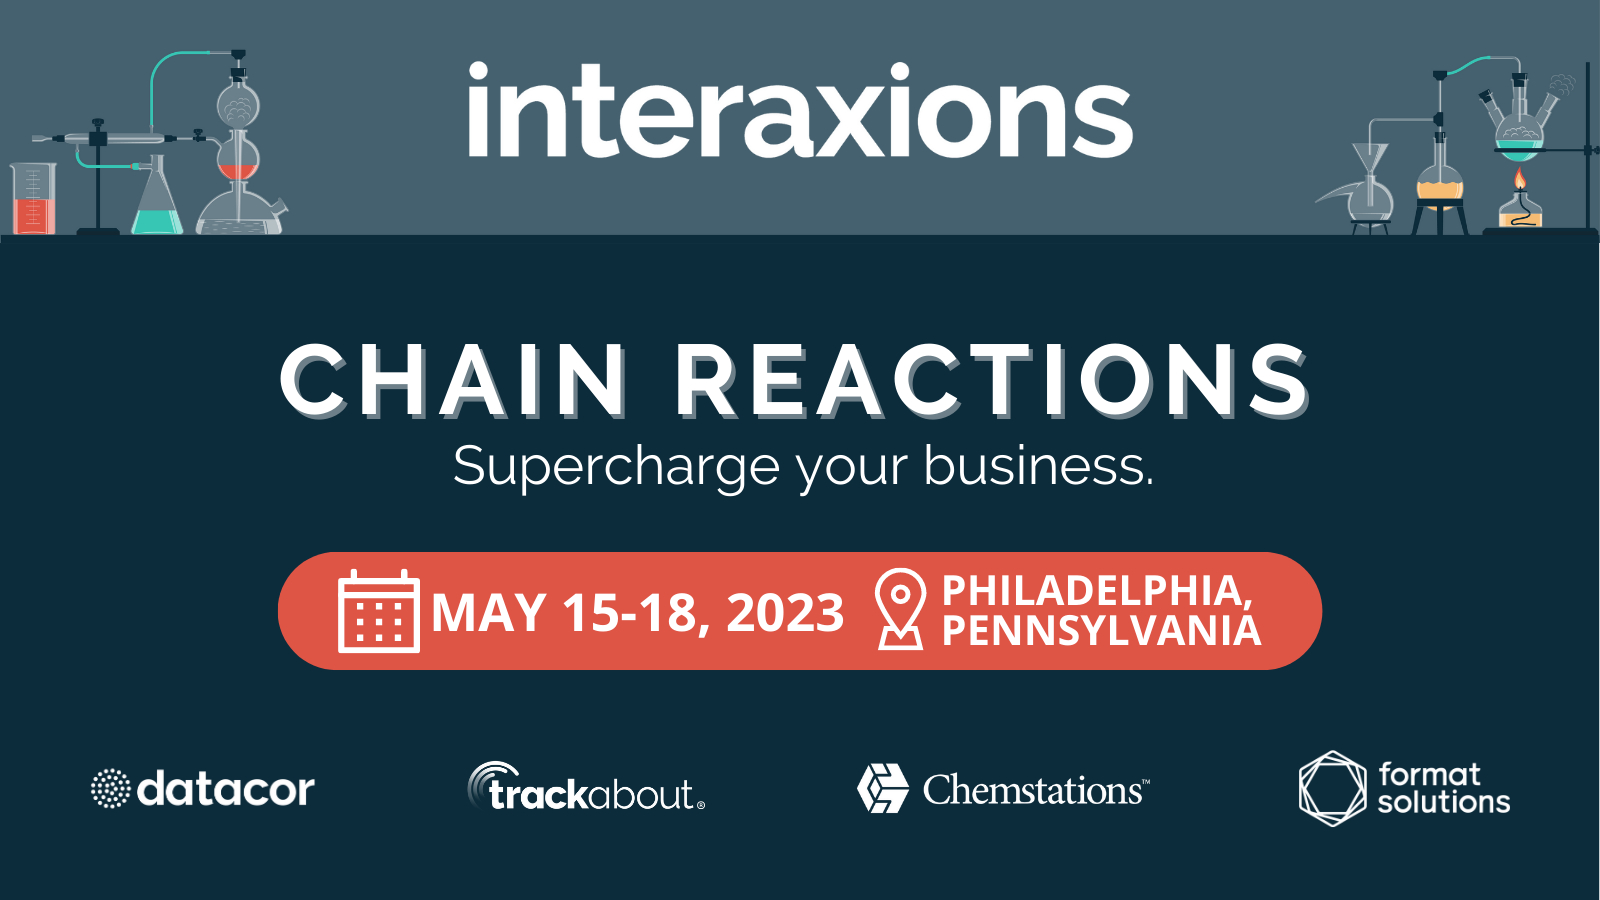 Interaxions 2023: Chain Reactions - Supercharge Your Business